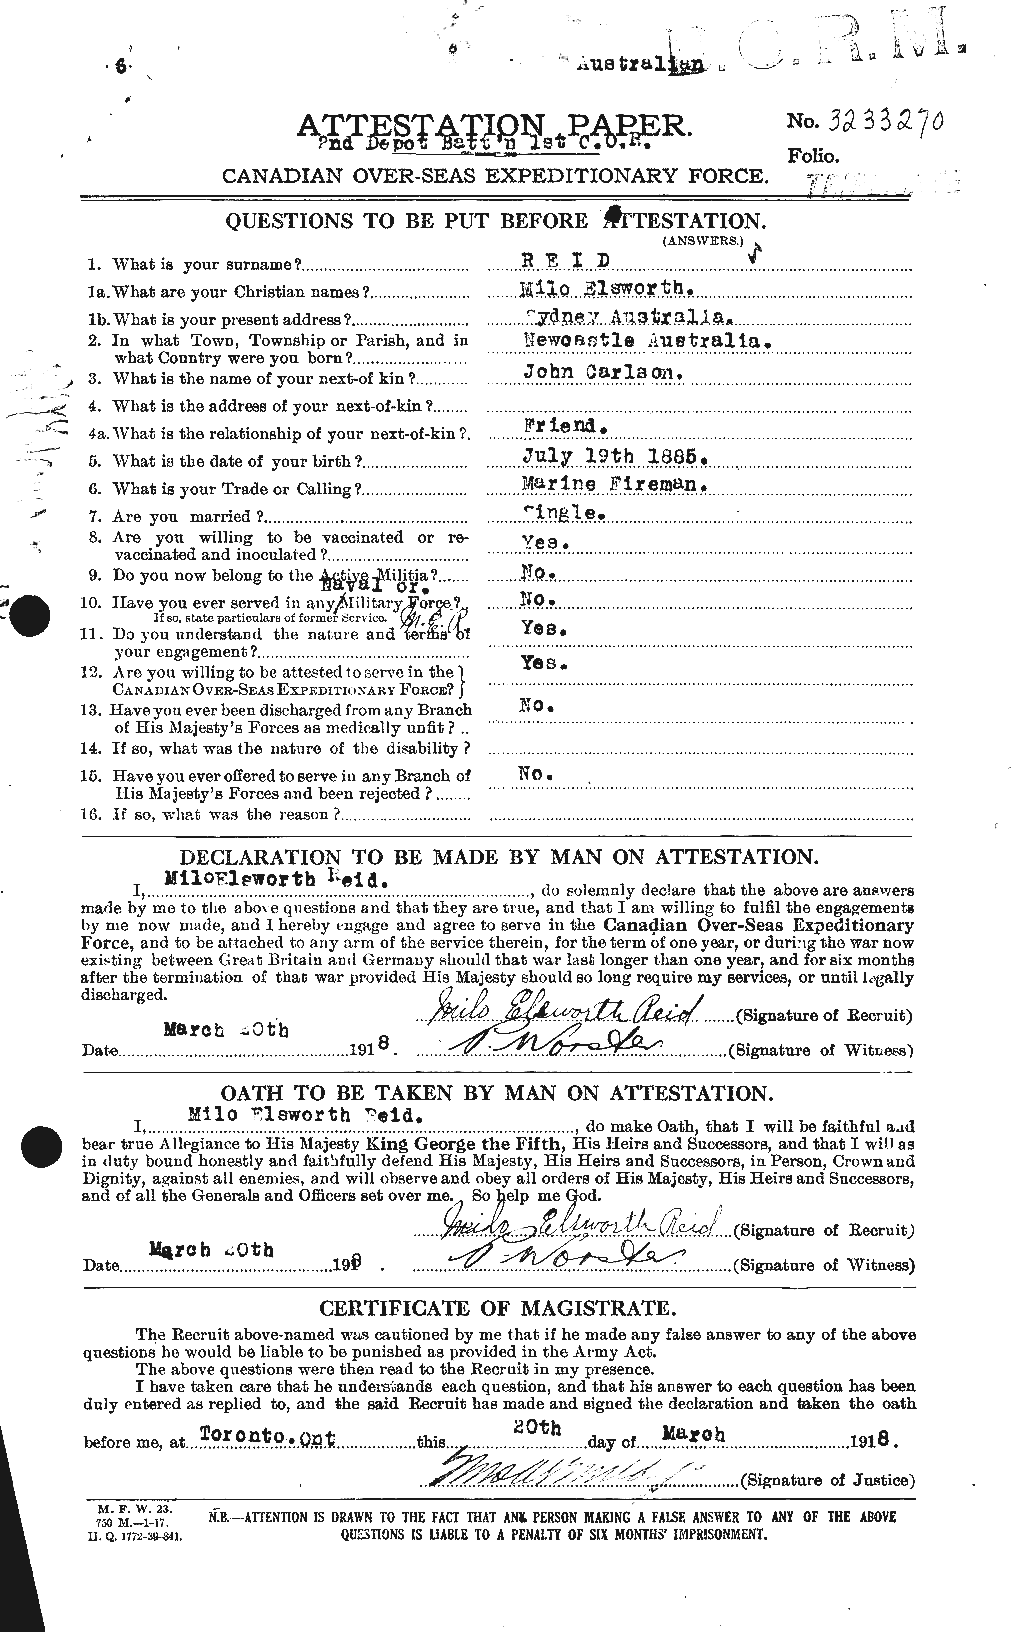 Personnel Records of the First World War - CEF 598956a